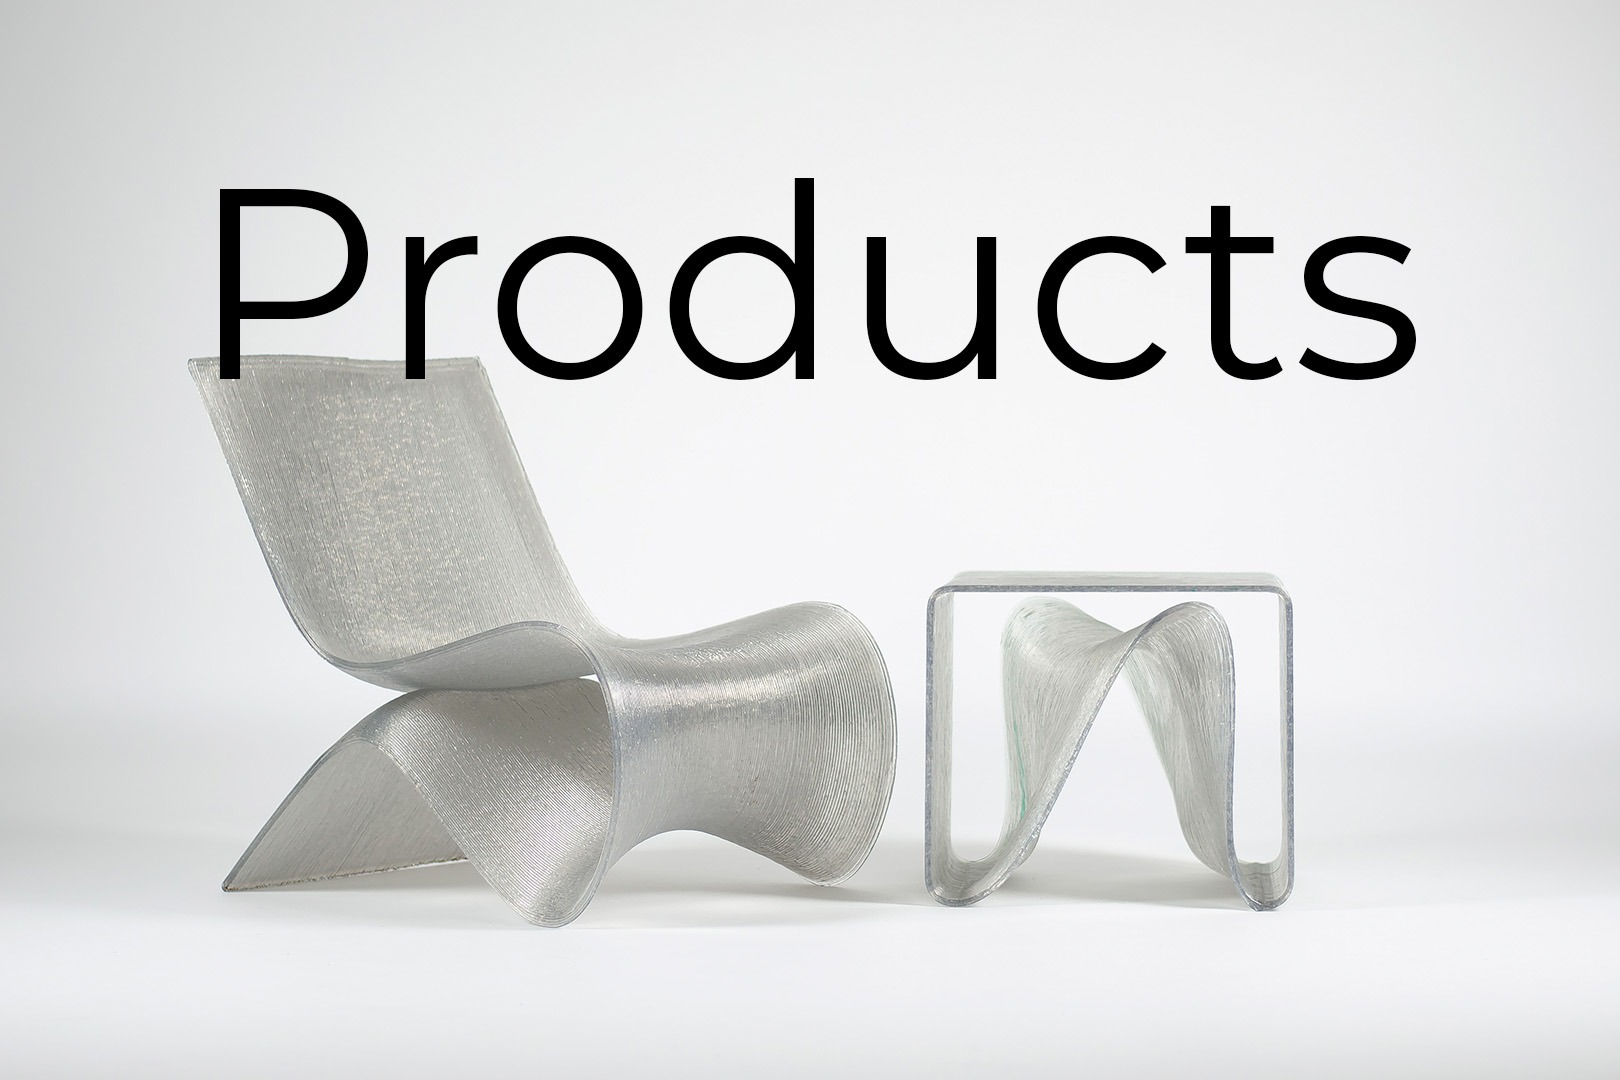 Sustainable design products made from recycled plastic